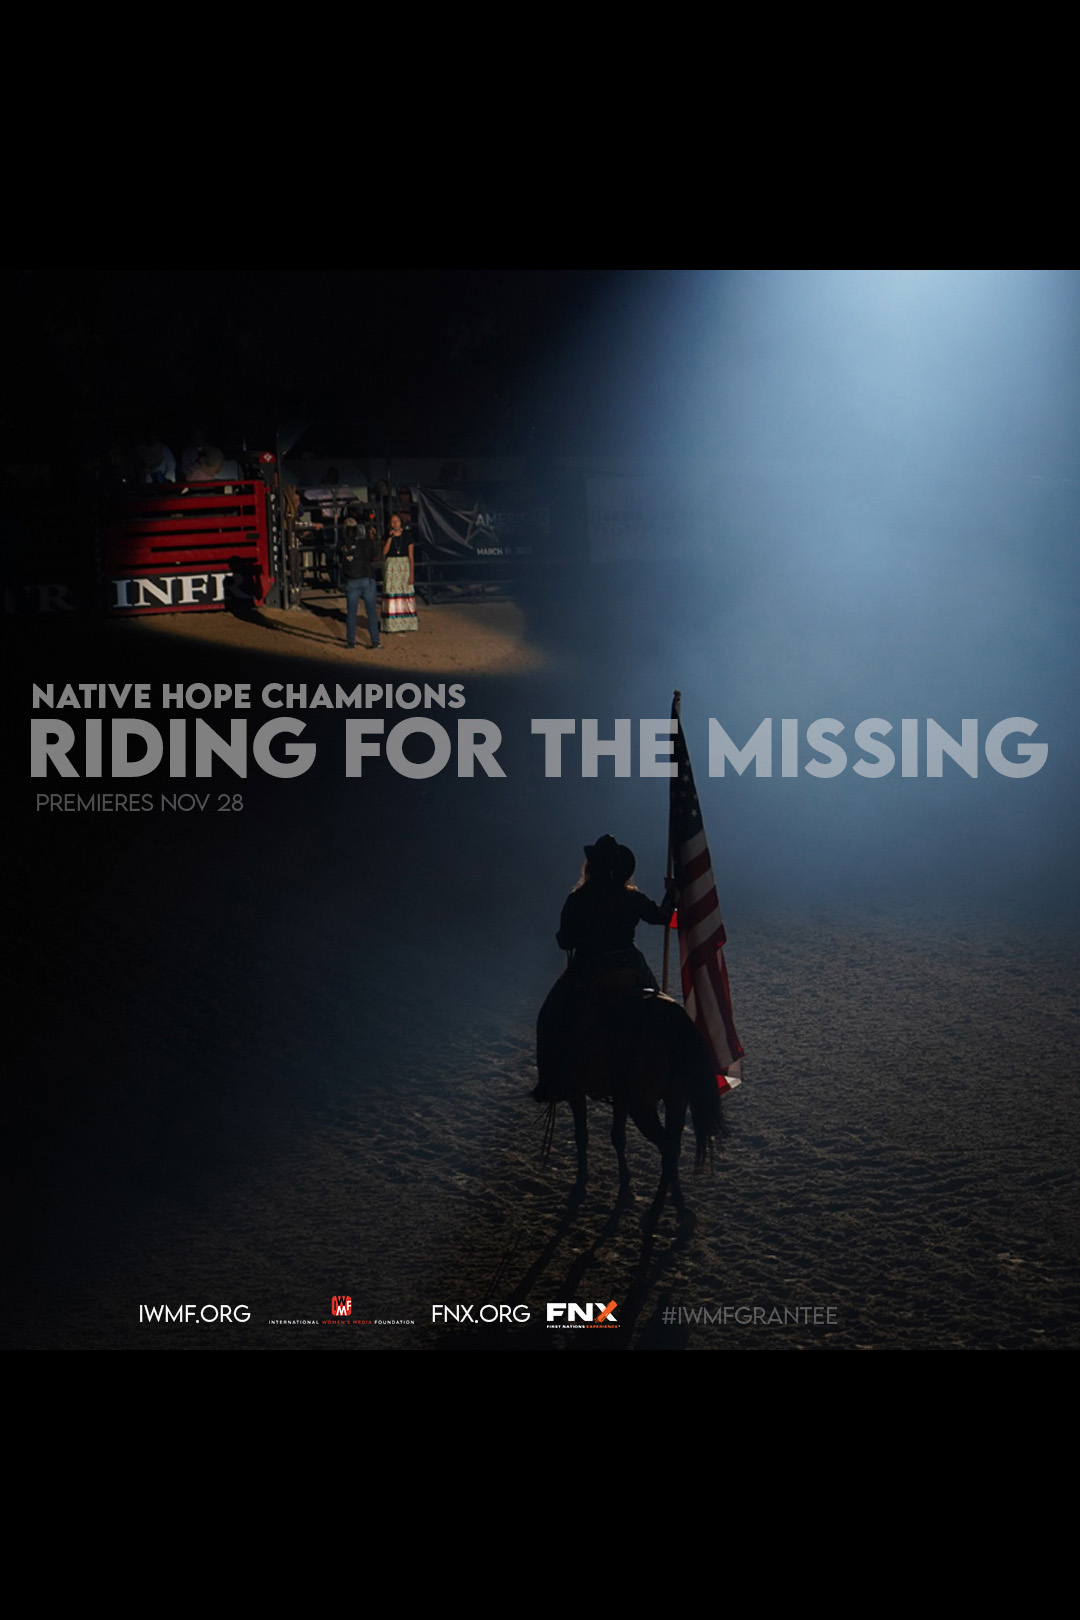 Native Hope Champions Riding for the Missing